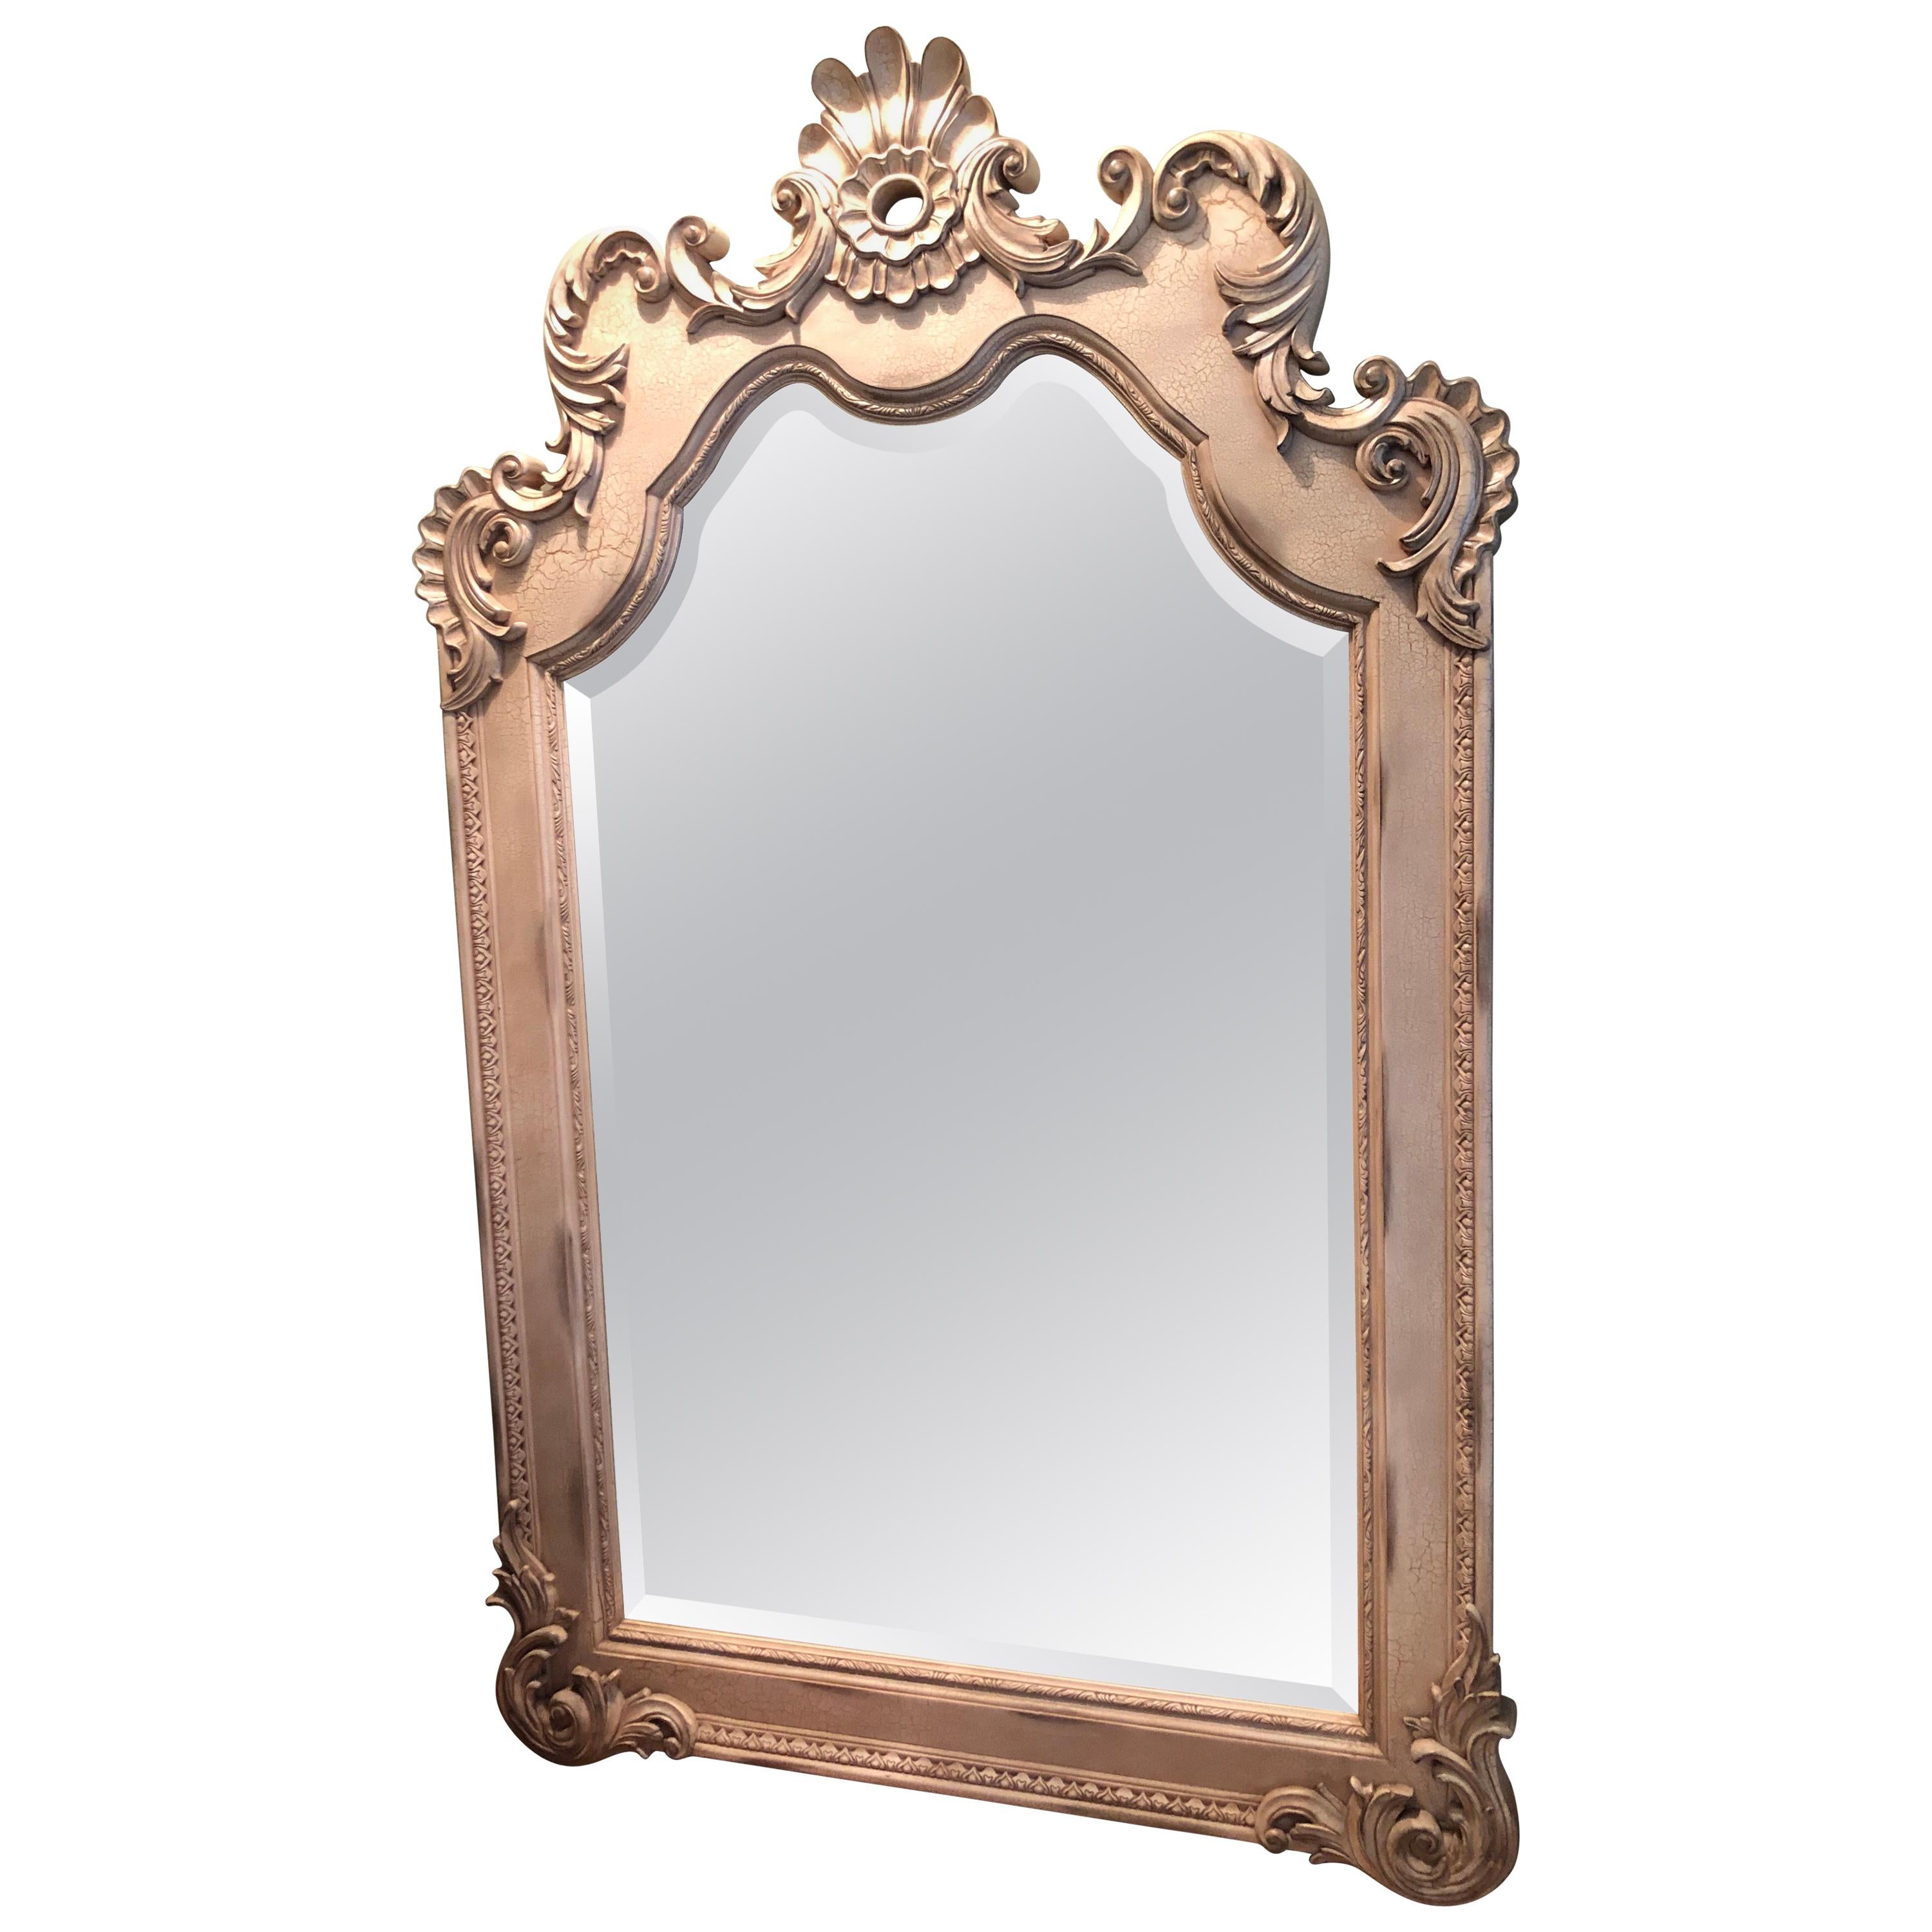 8 ft. Tall Hollywood Regency Style Leaning or Wall Mount Mirror